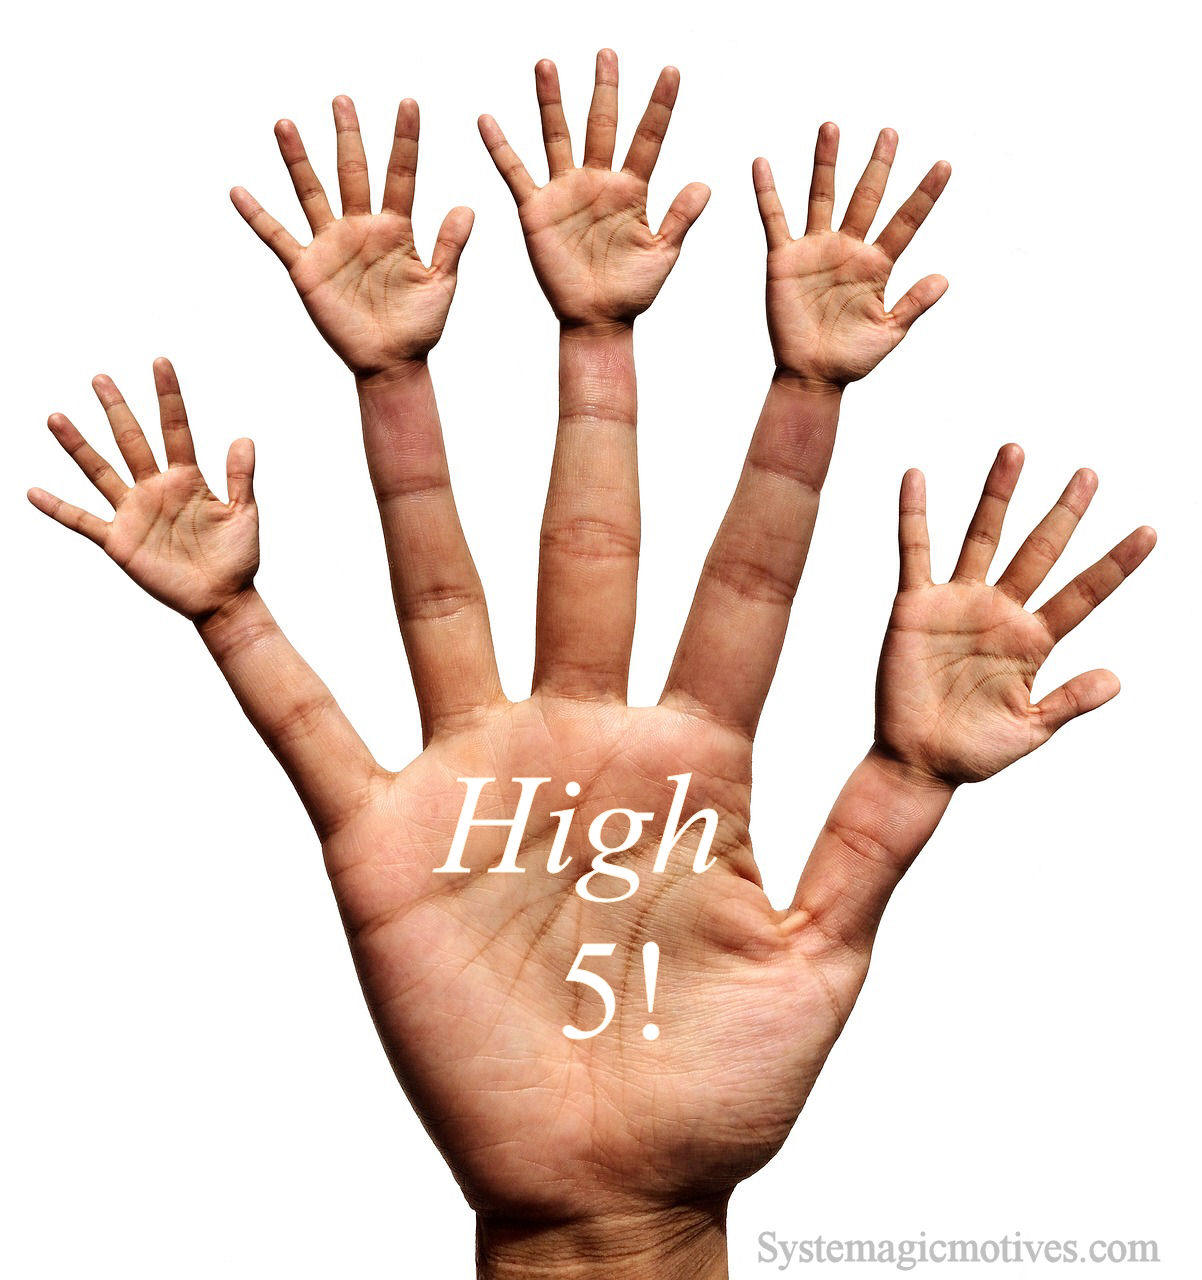 Hand with 5 hands